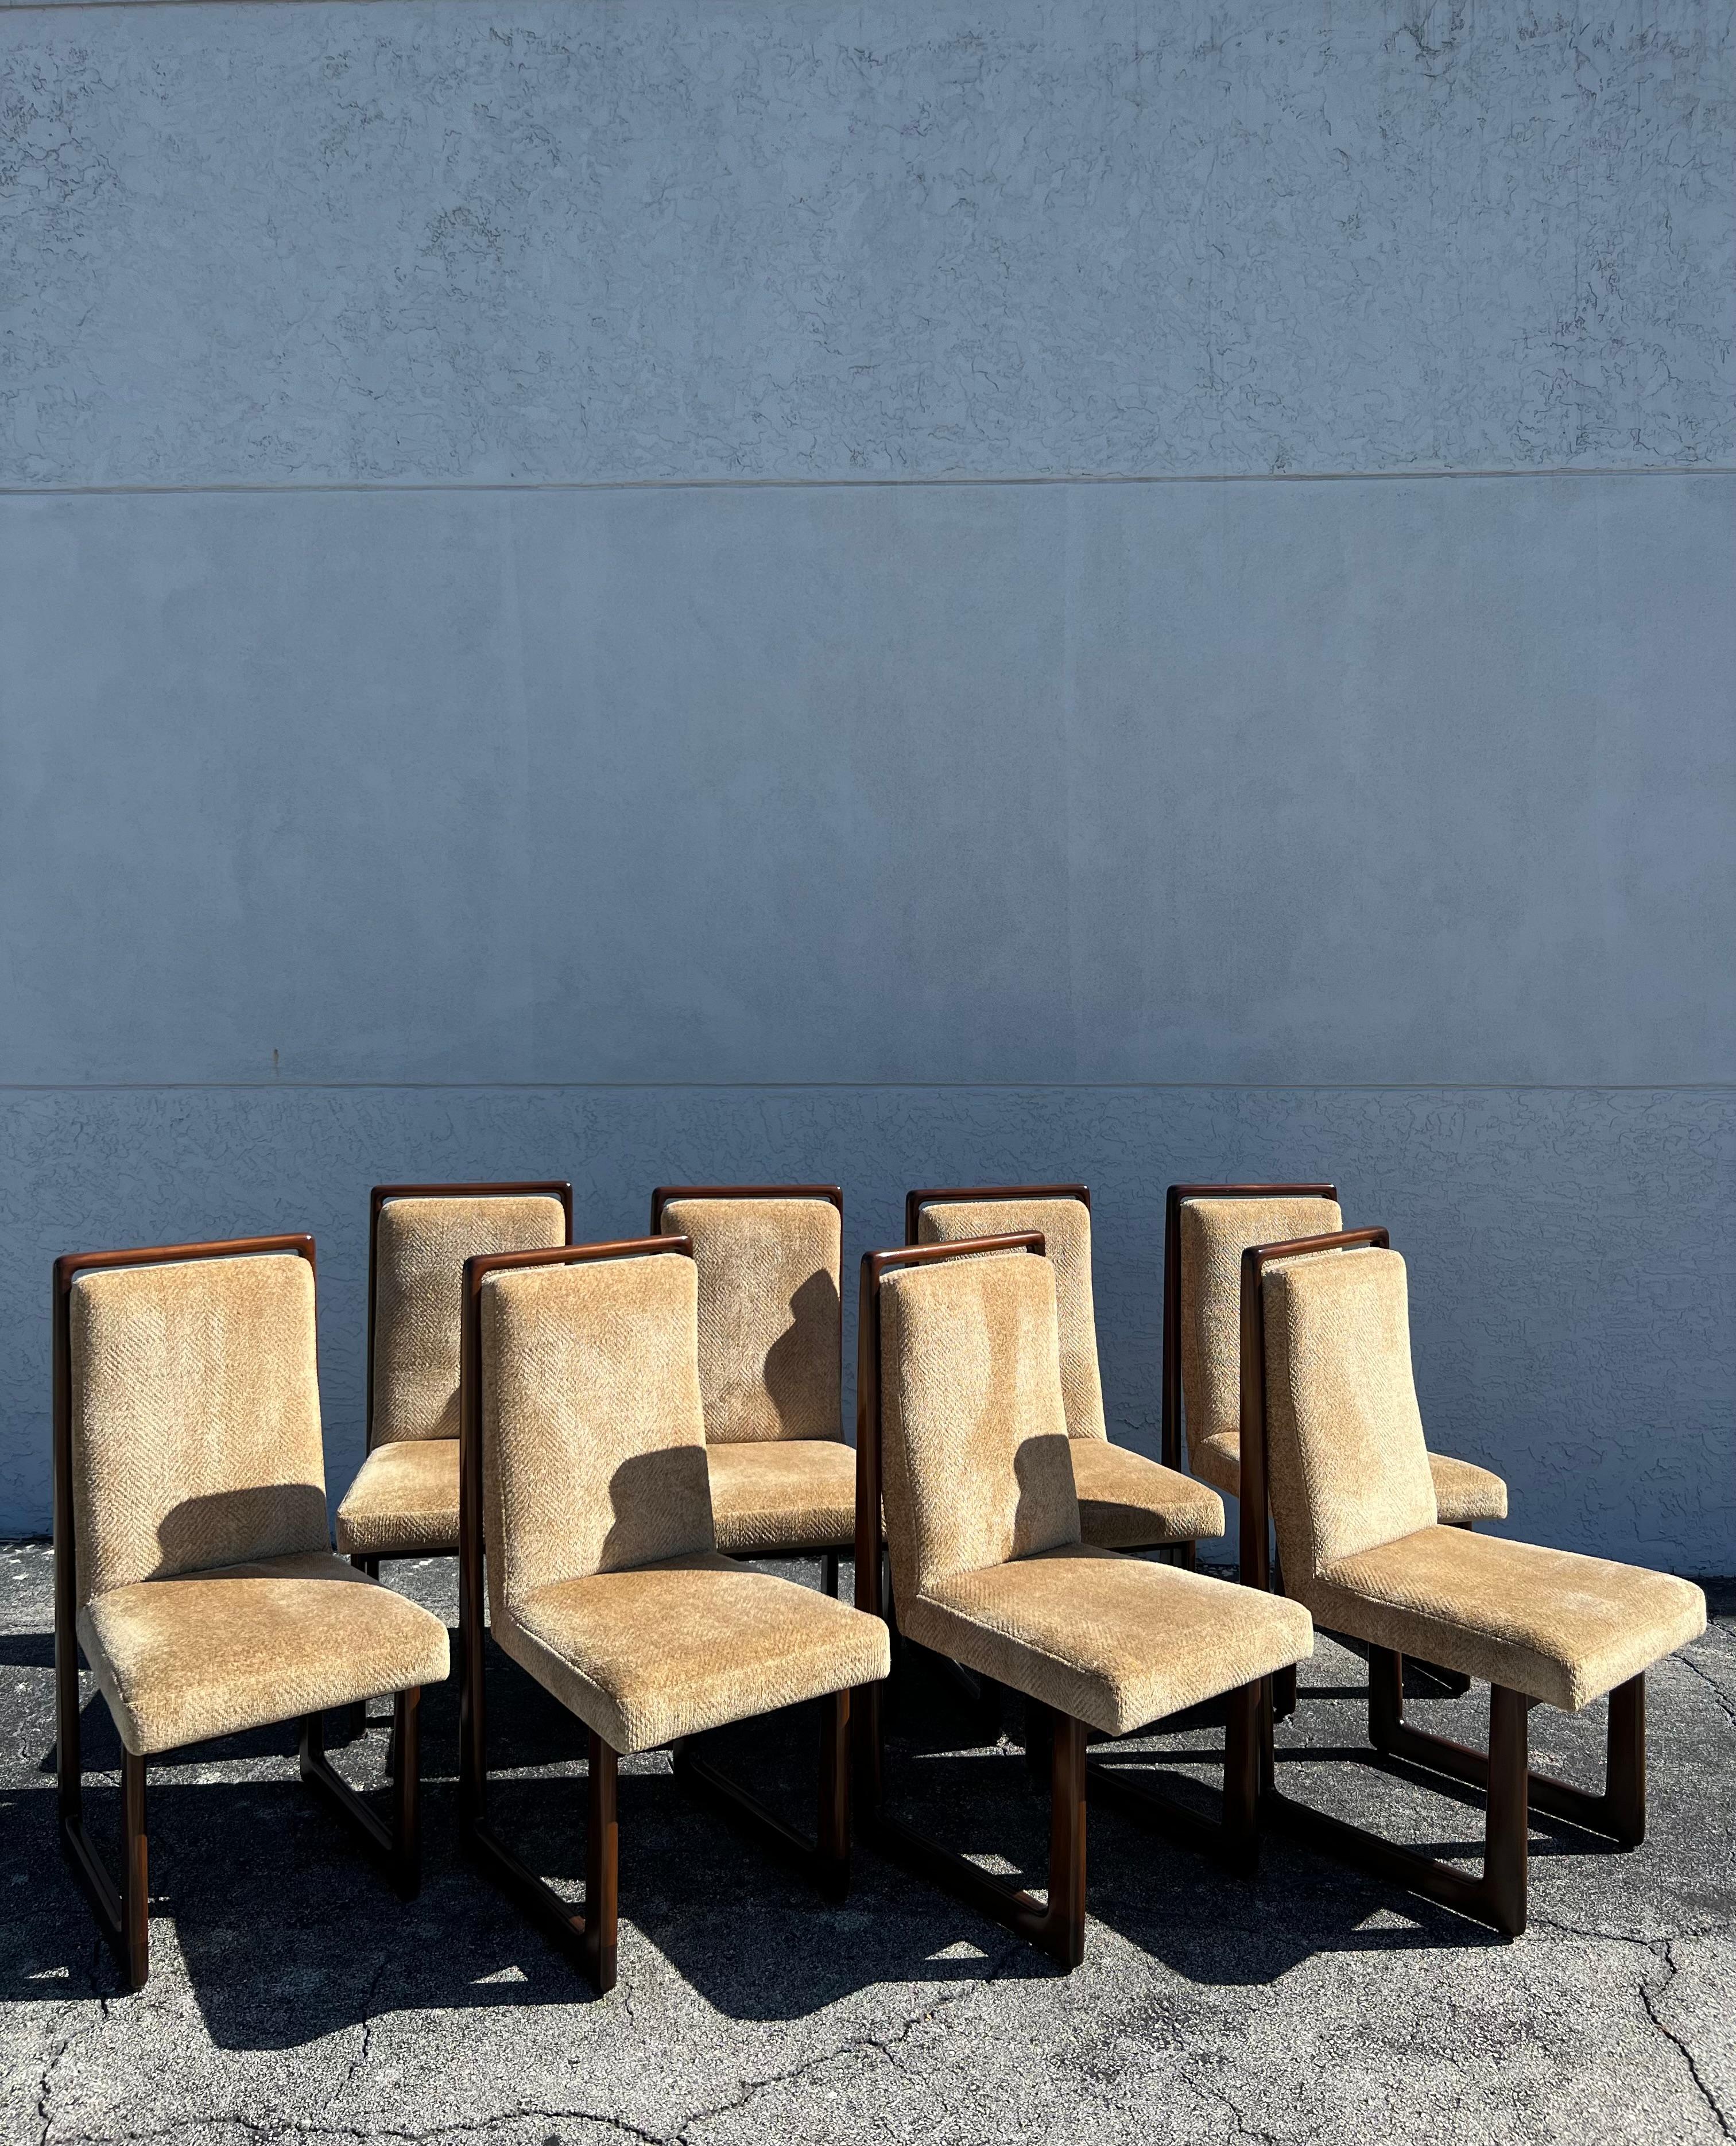 Set of 8 cubist dining chairs by Vladimir Kagan. The chairs were refinished and reupholstered in a heavy gold colored chenille years ago. Unfortunately the original labels were refinished over, however they do still remain intact. We’ve included an